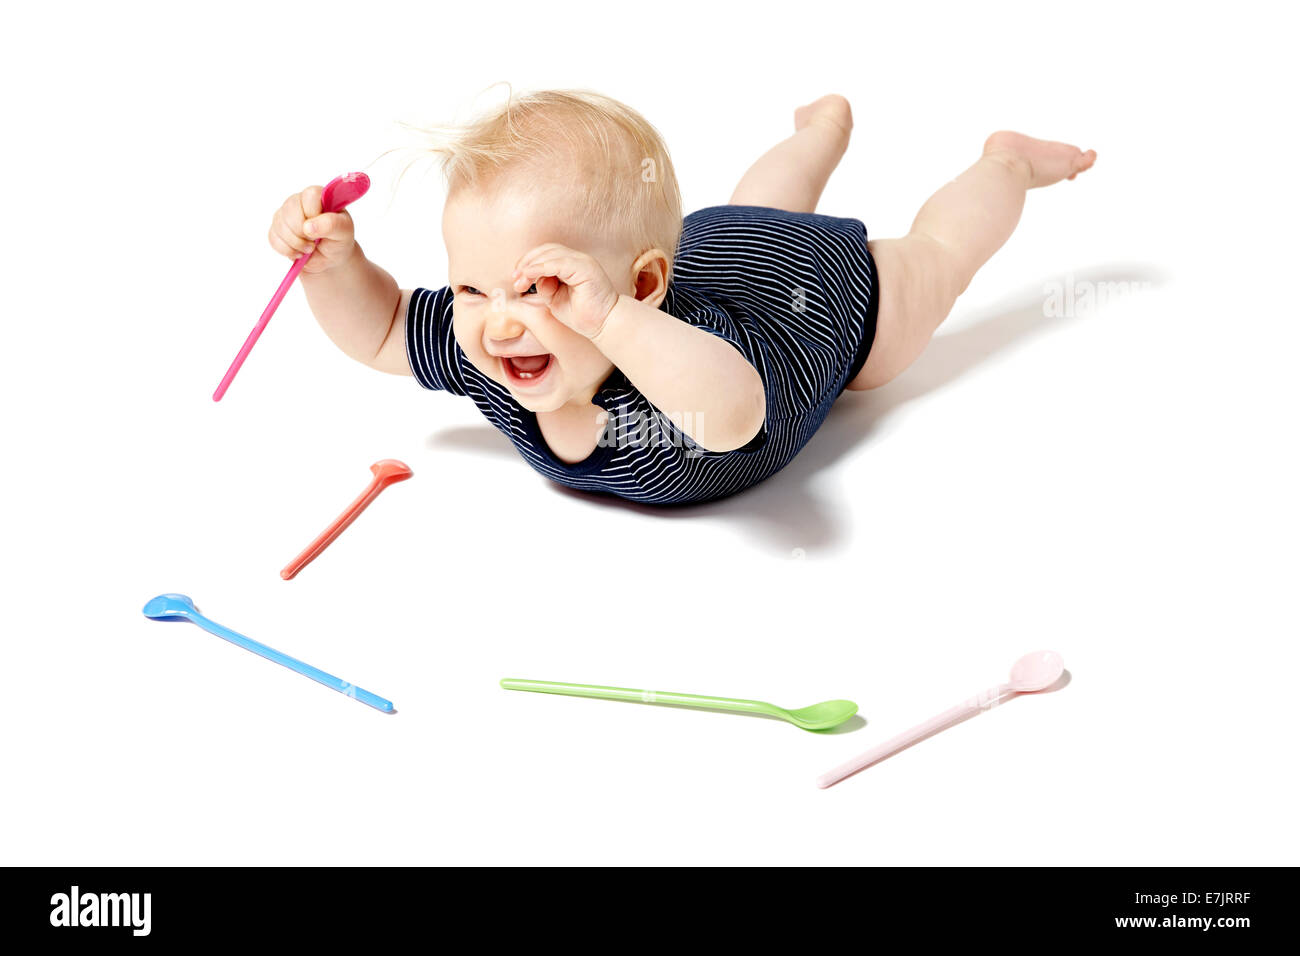 Seven months old baby picking spoon. Isolated on white background. Stock Photo